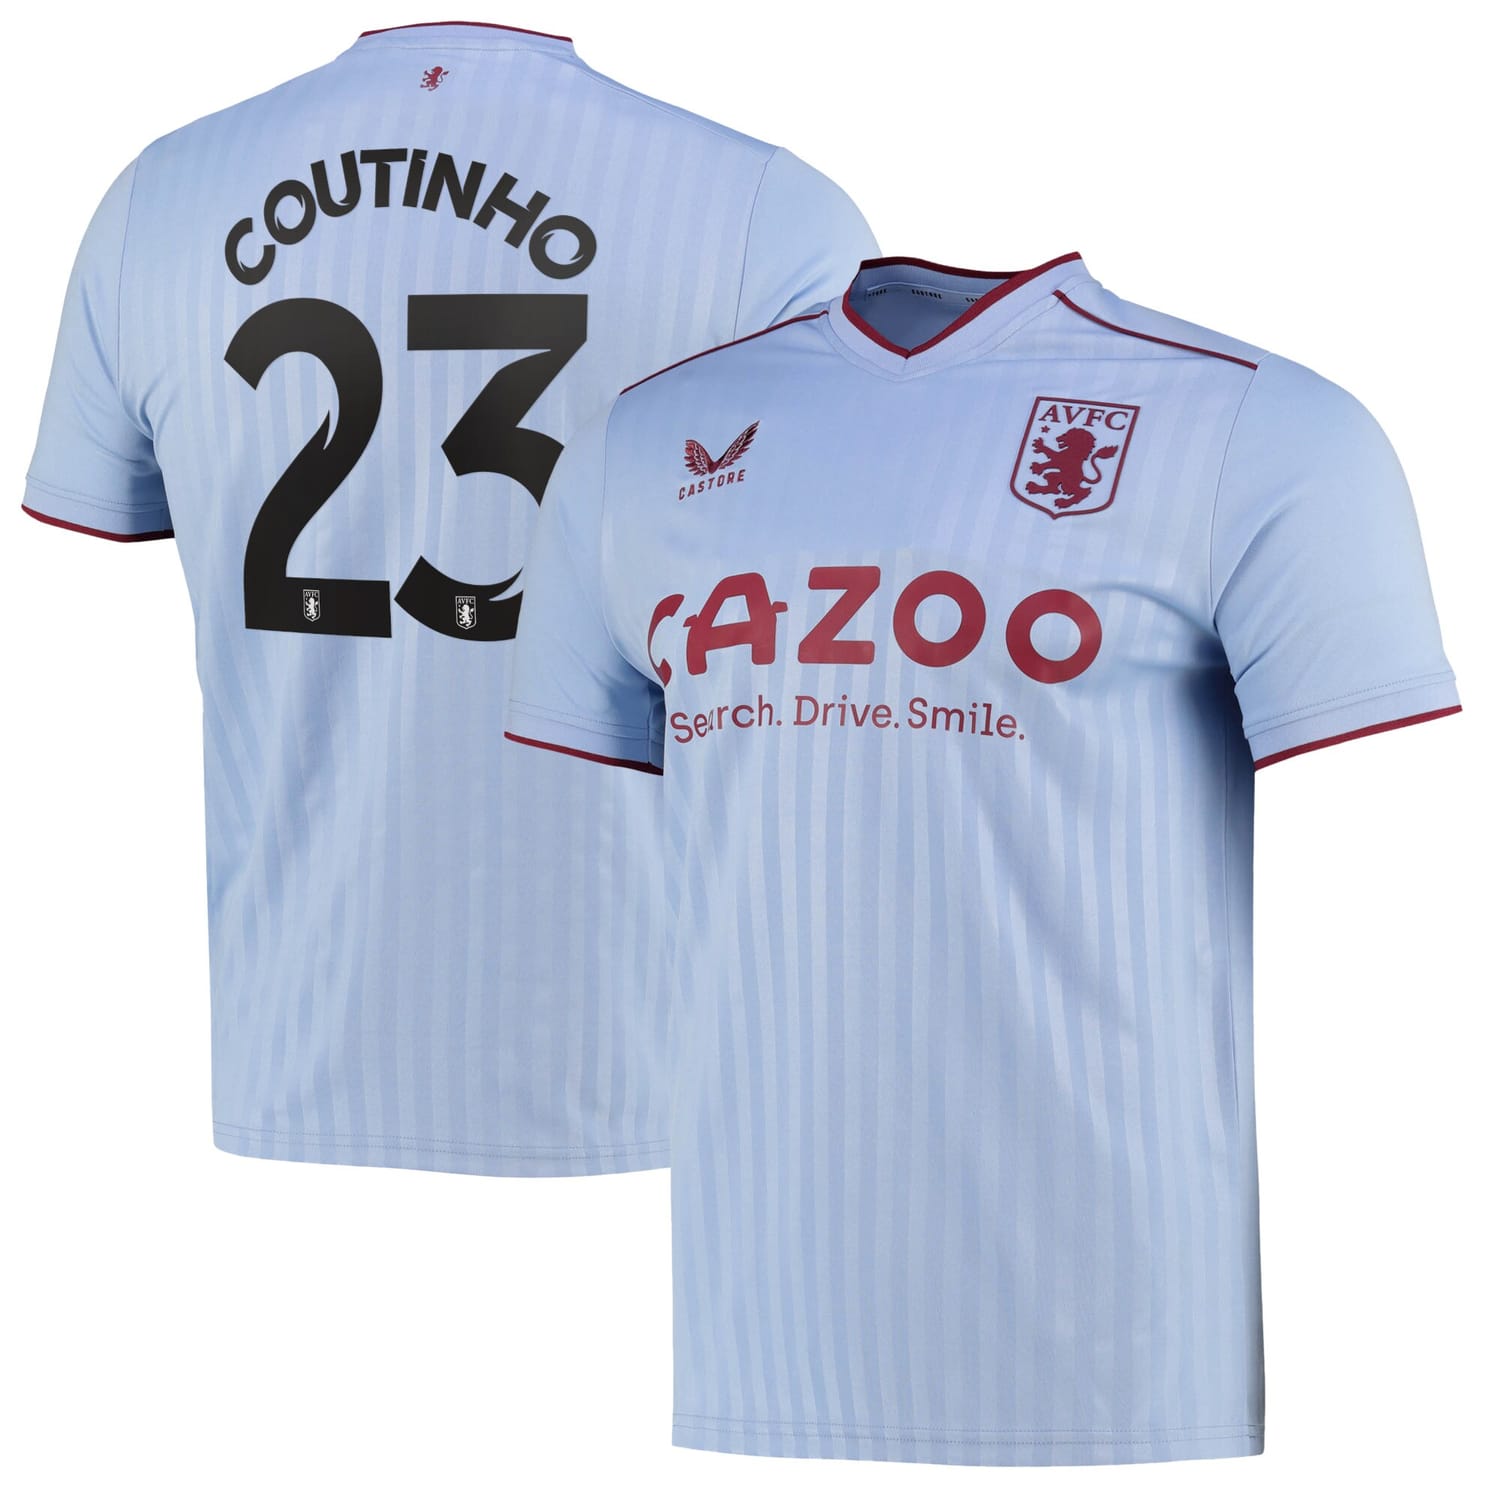 Premier League Aston Villa Away Cup Jersey Shirt 2022-23 player Philippe Coutinho 23 printing for Men